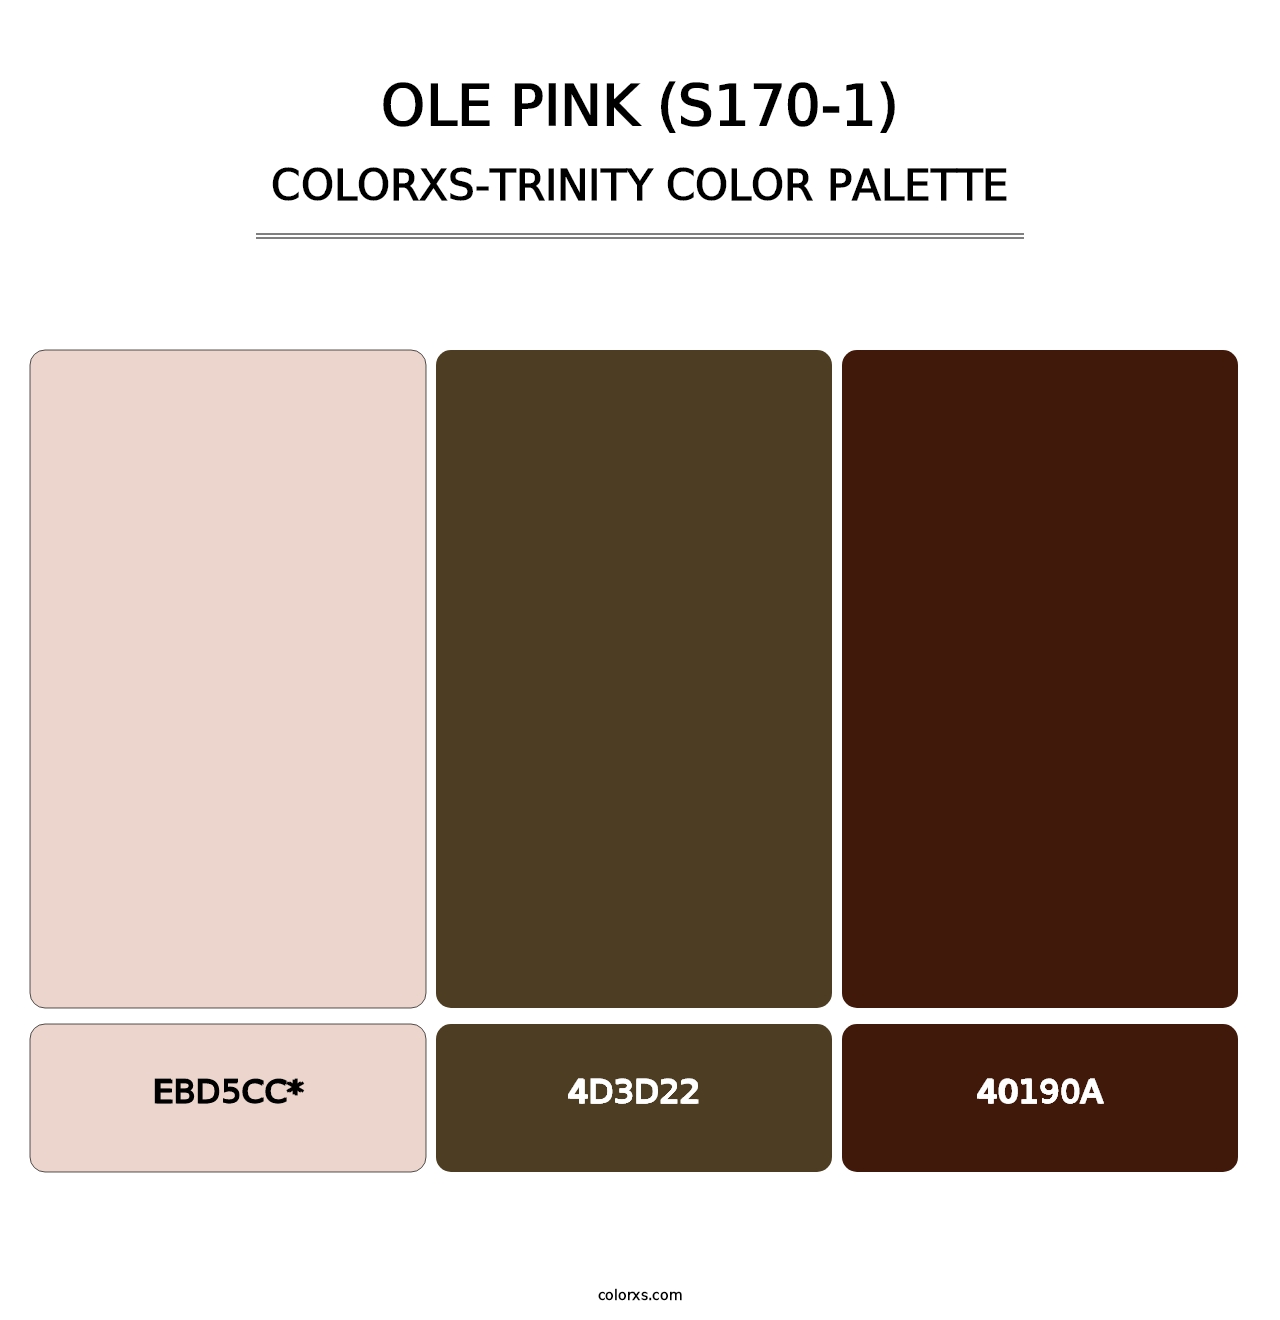 Ole Pink (S170-1) - Colorxs Trinity Palette